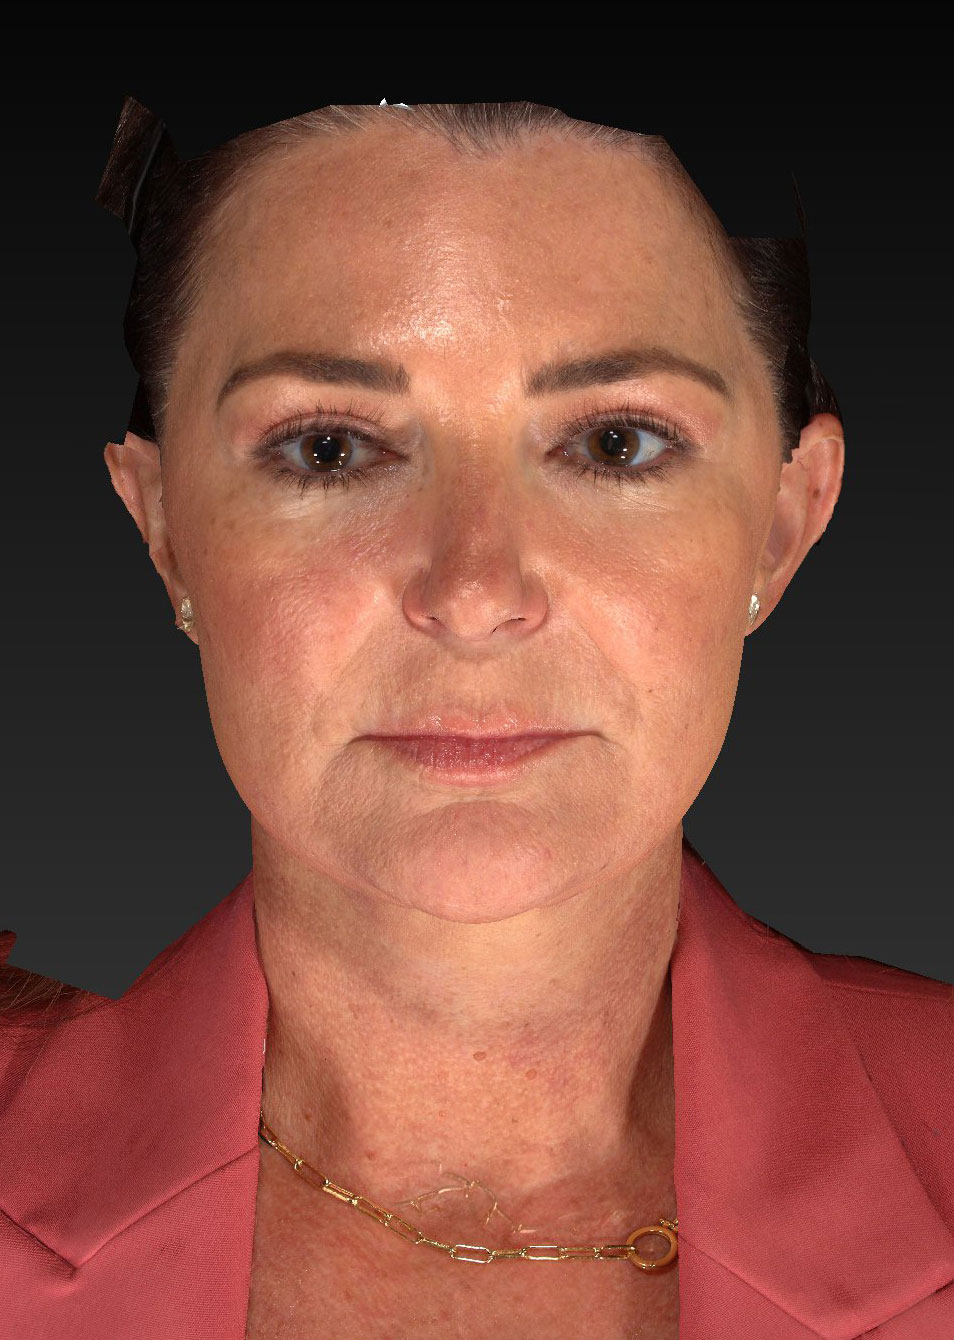 Facelift: Lower Face And Neck Lift Before and After 25